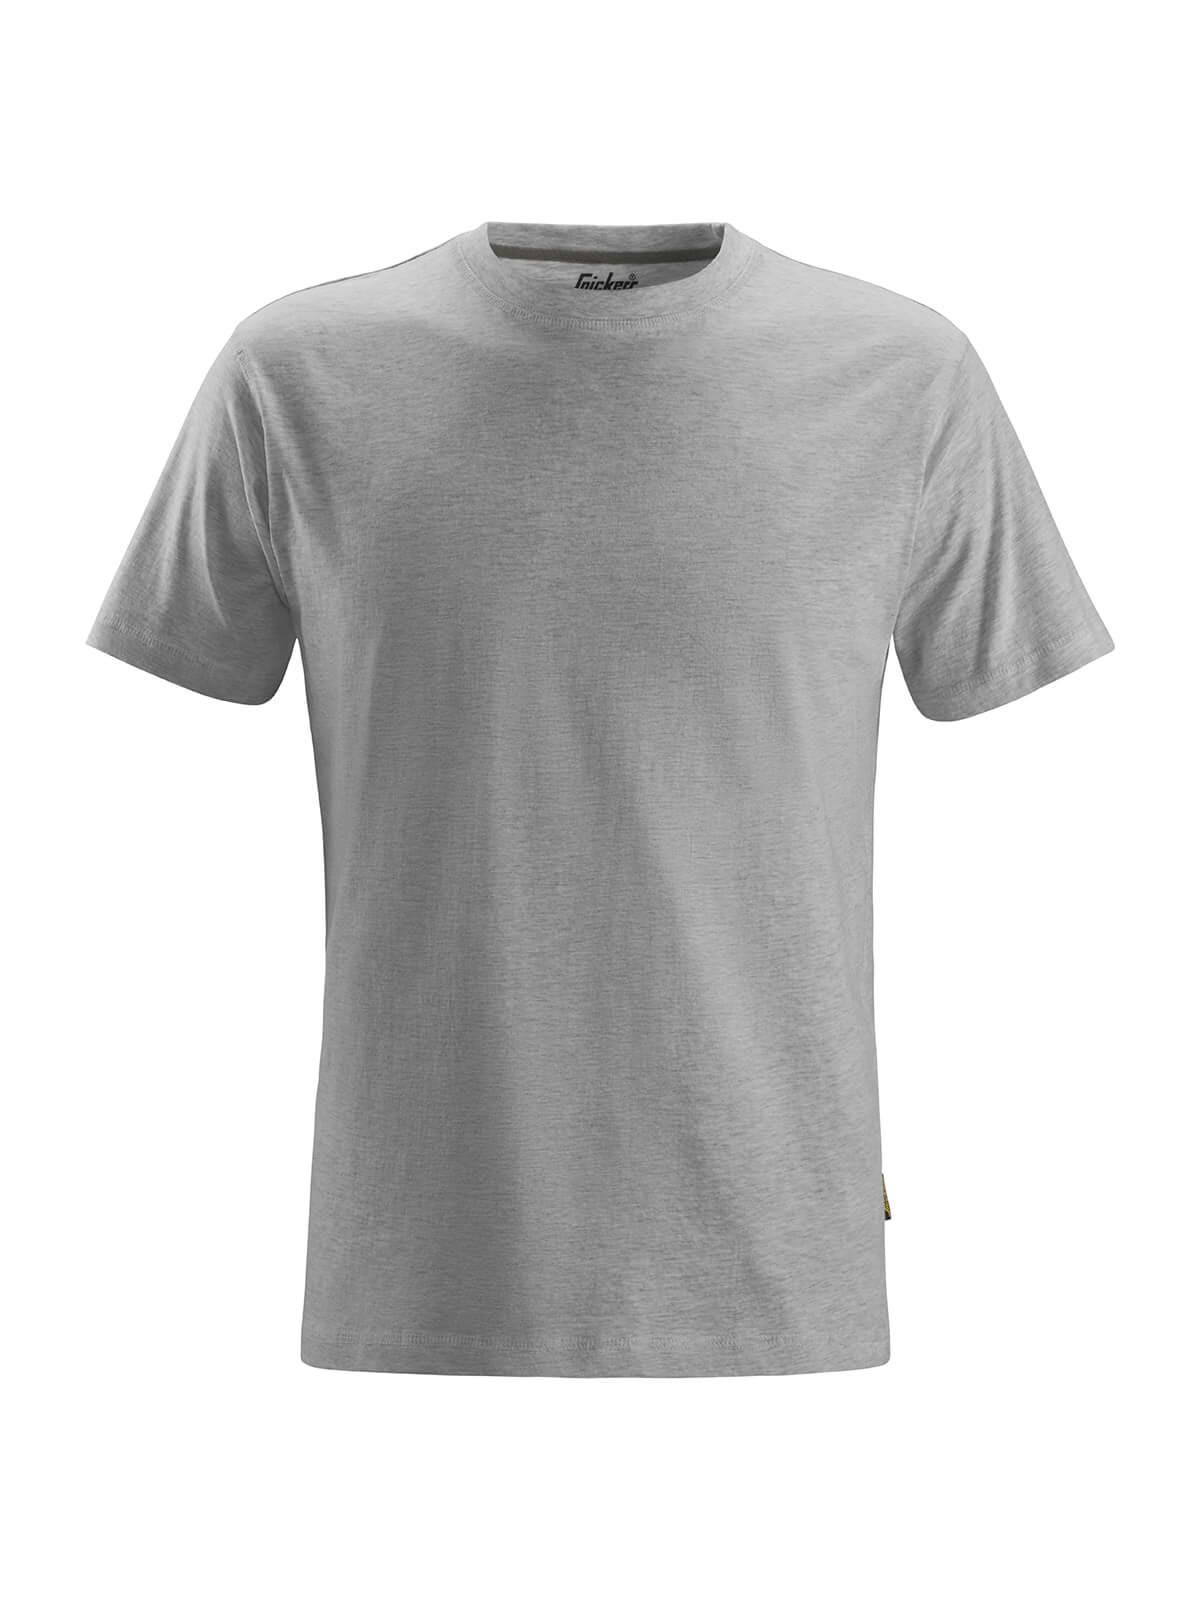 Snickers 2502 Classic T-Shirt - Steel Grey